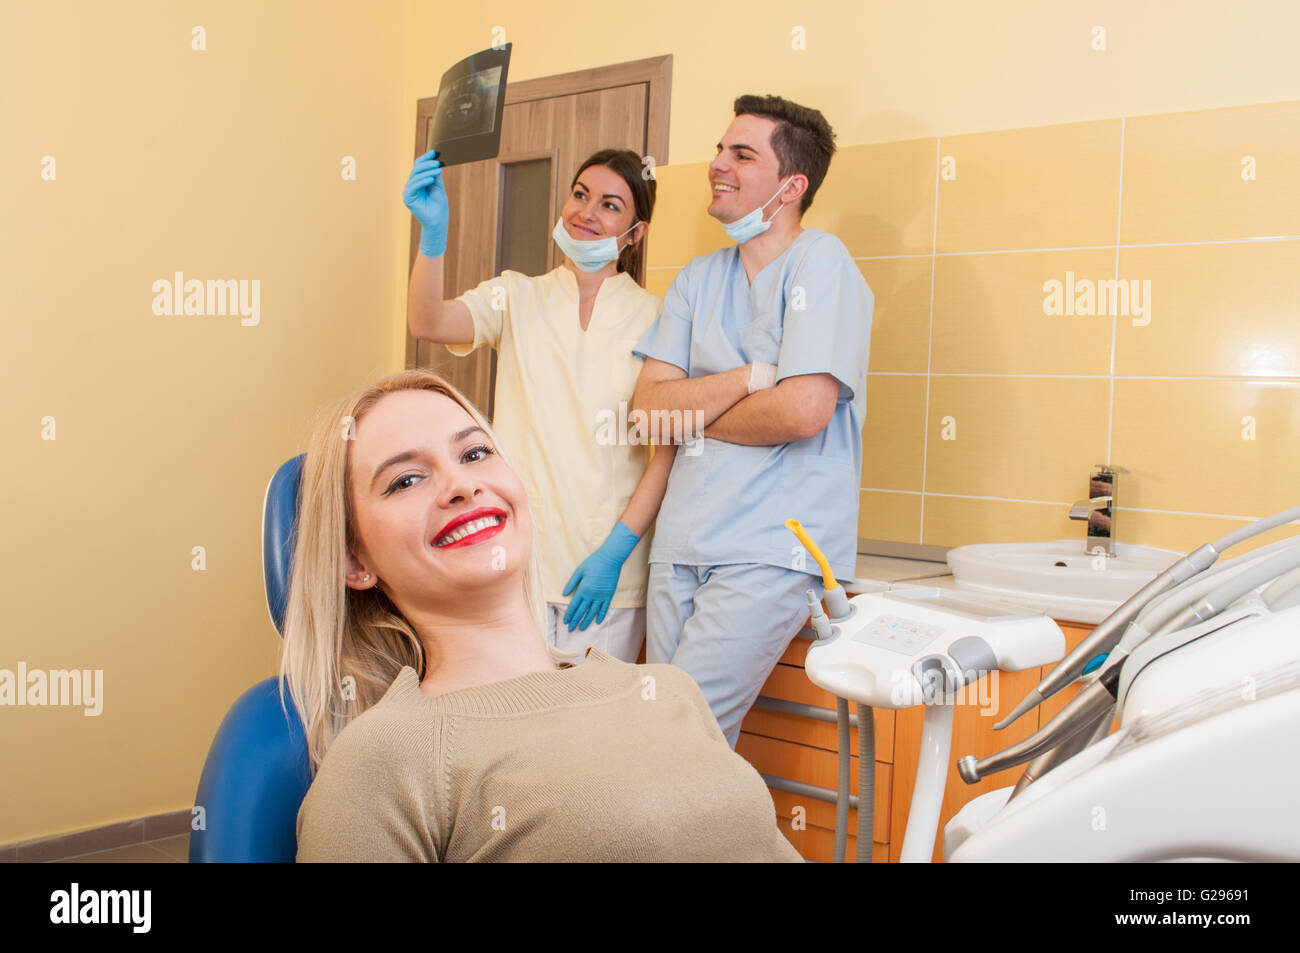 Satisfied dental team and beautiful smiling female patient Stock Photo